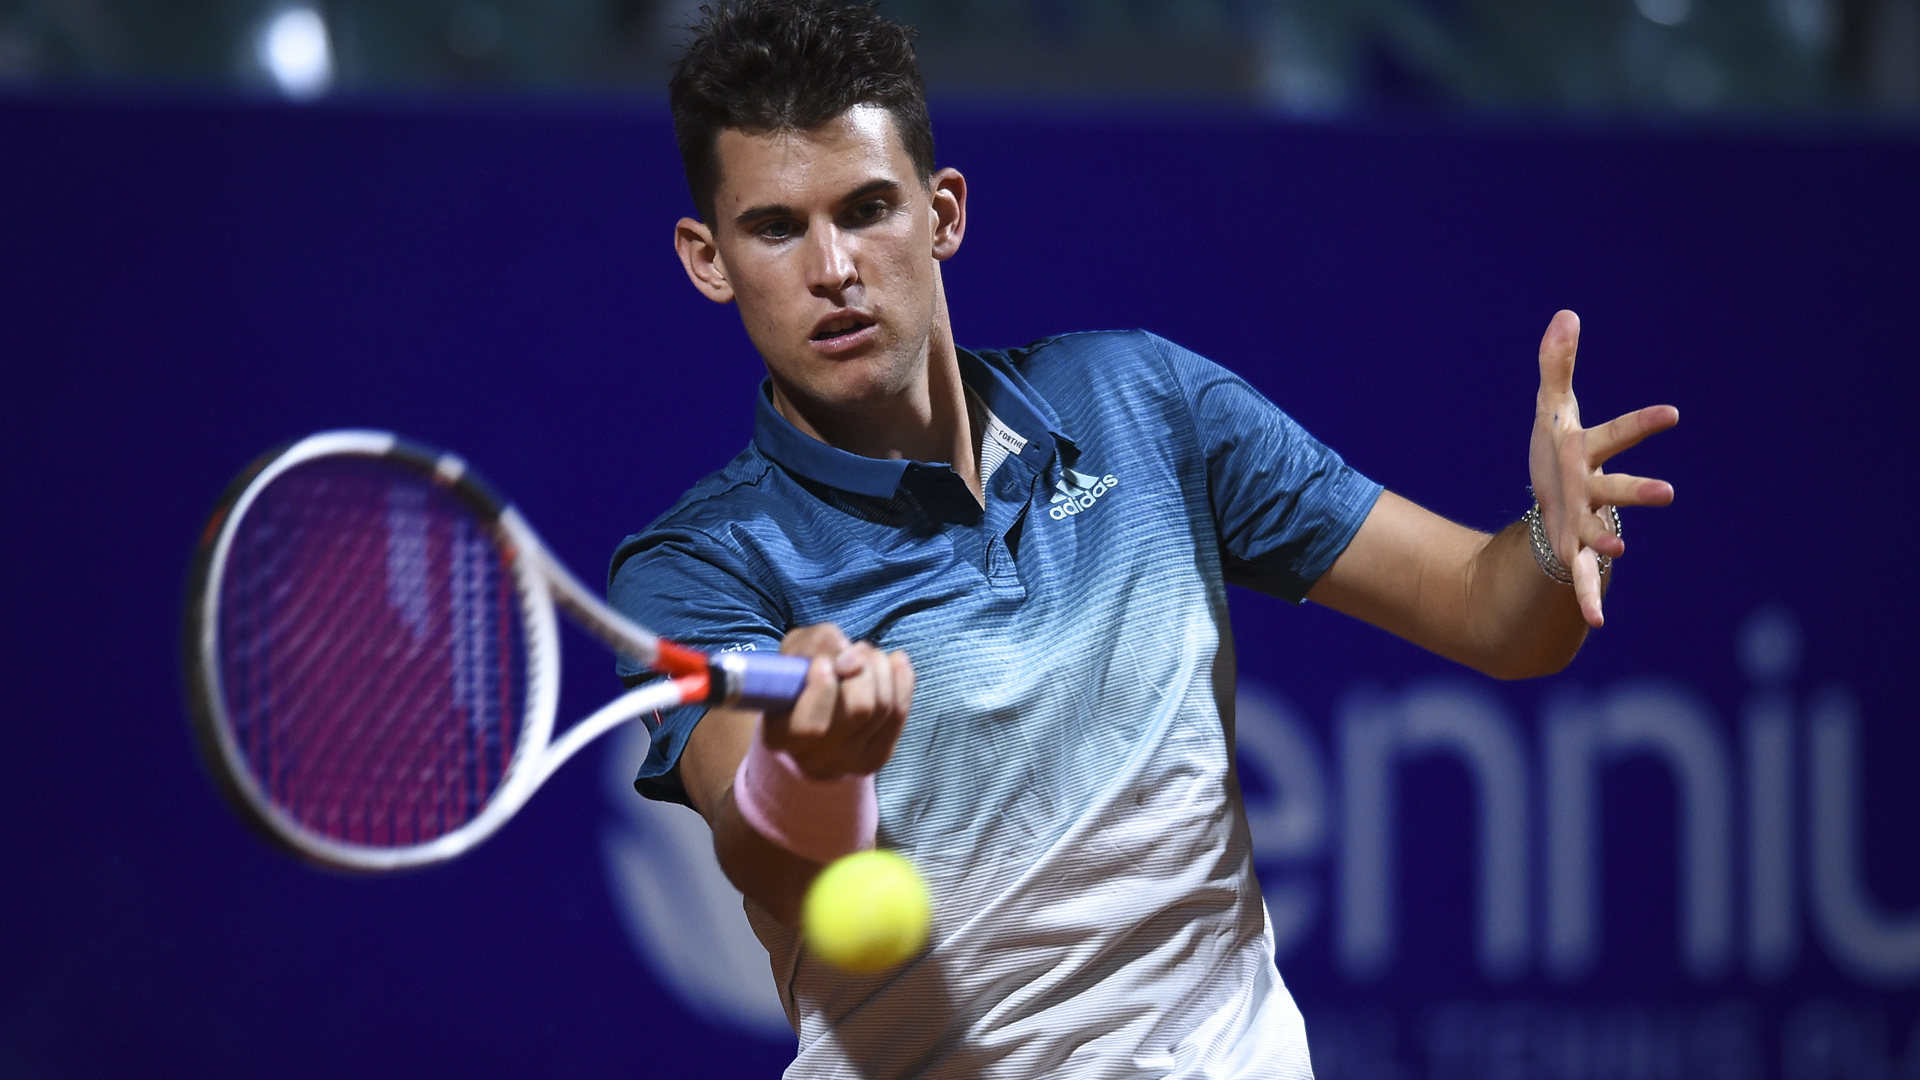 Dominic Thiem remained unbeaten at the Argentina Open, defeating Pablo Cuevas to reach the semi-finals.